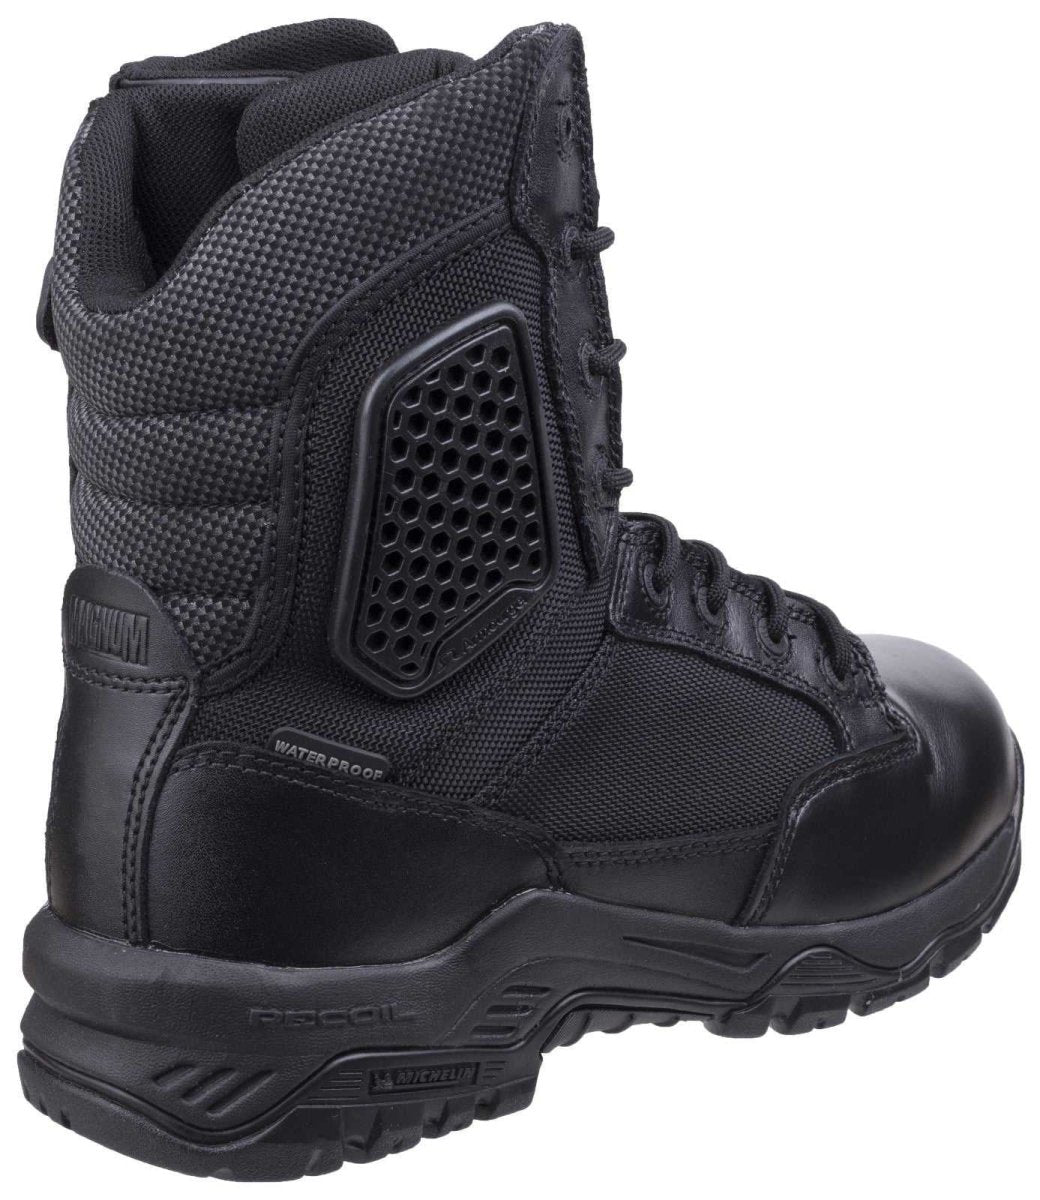 Magnum Strike Force 8.0 Leather & Mesh Safety Boots - Shoe Store Direct